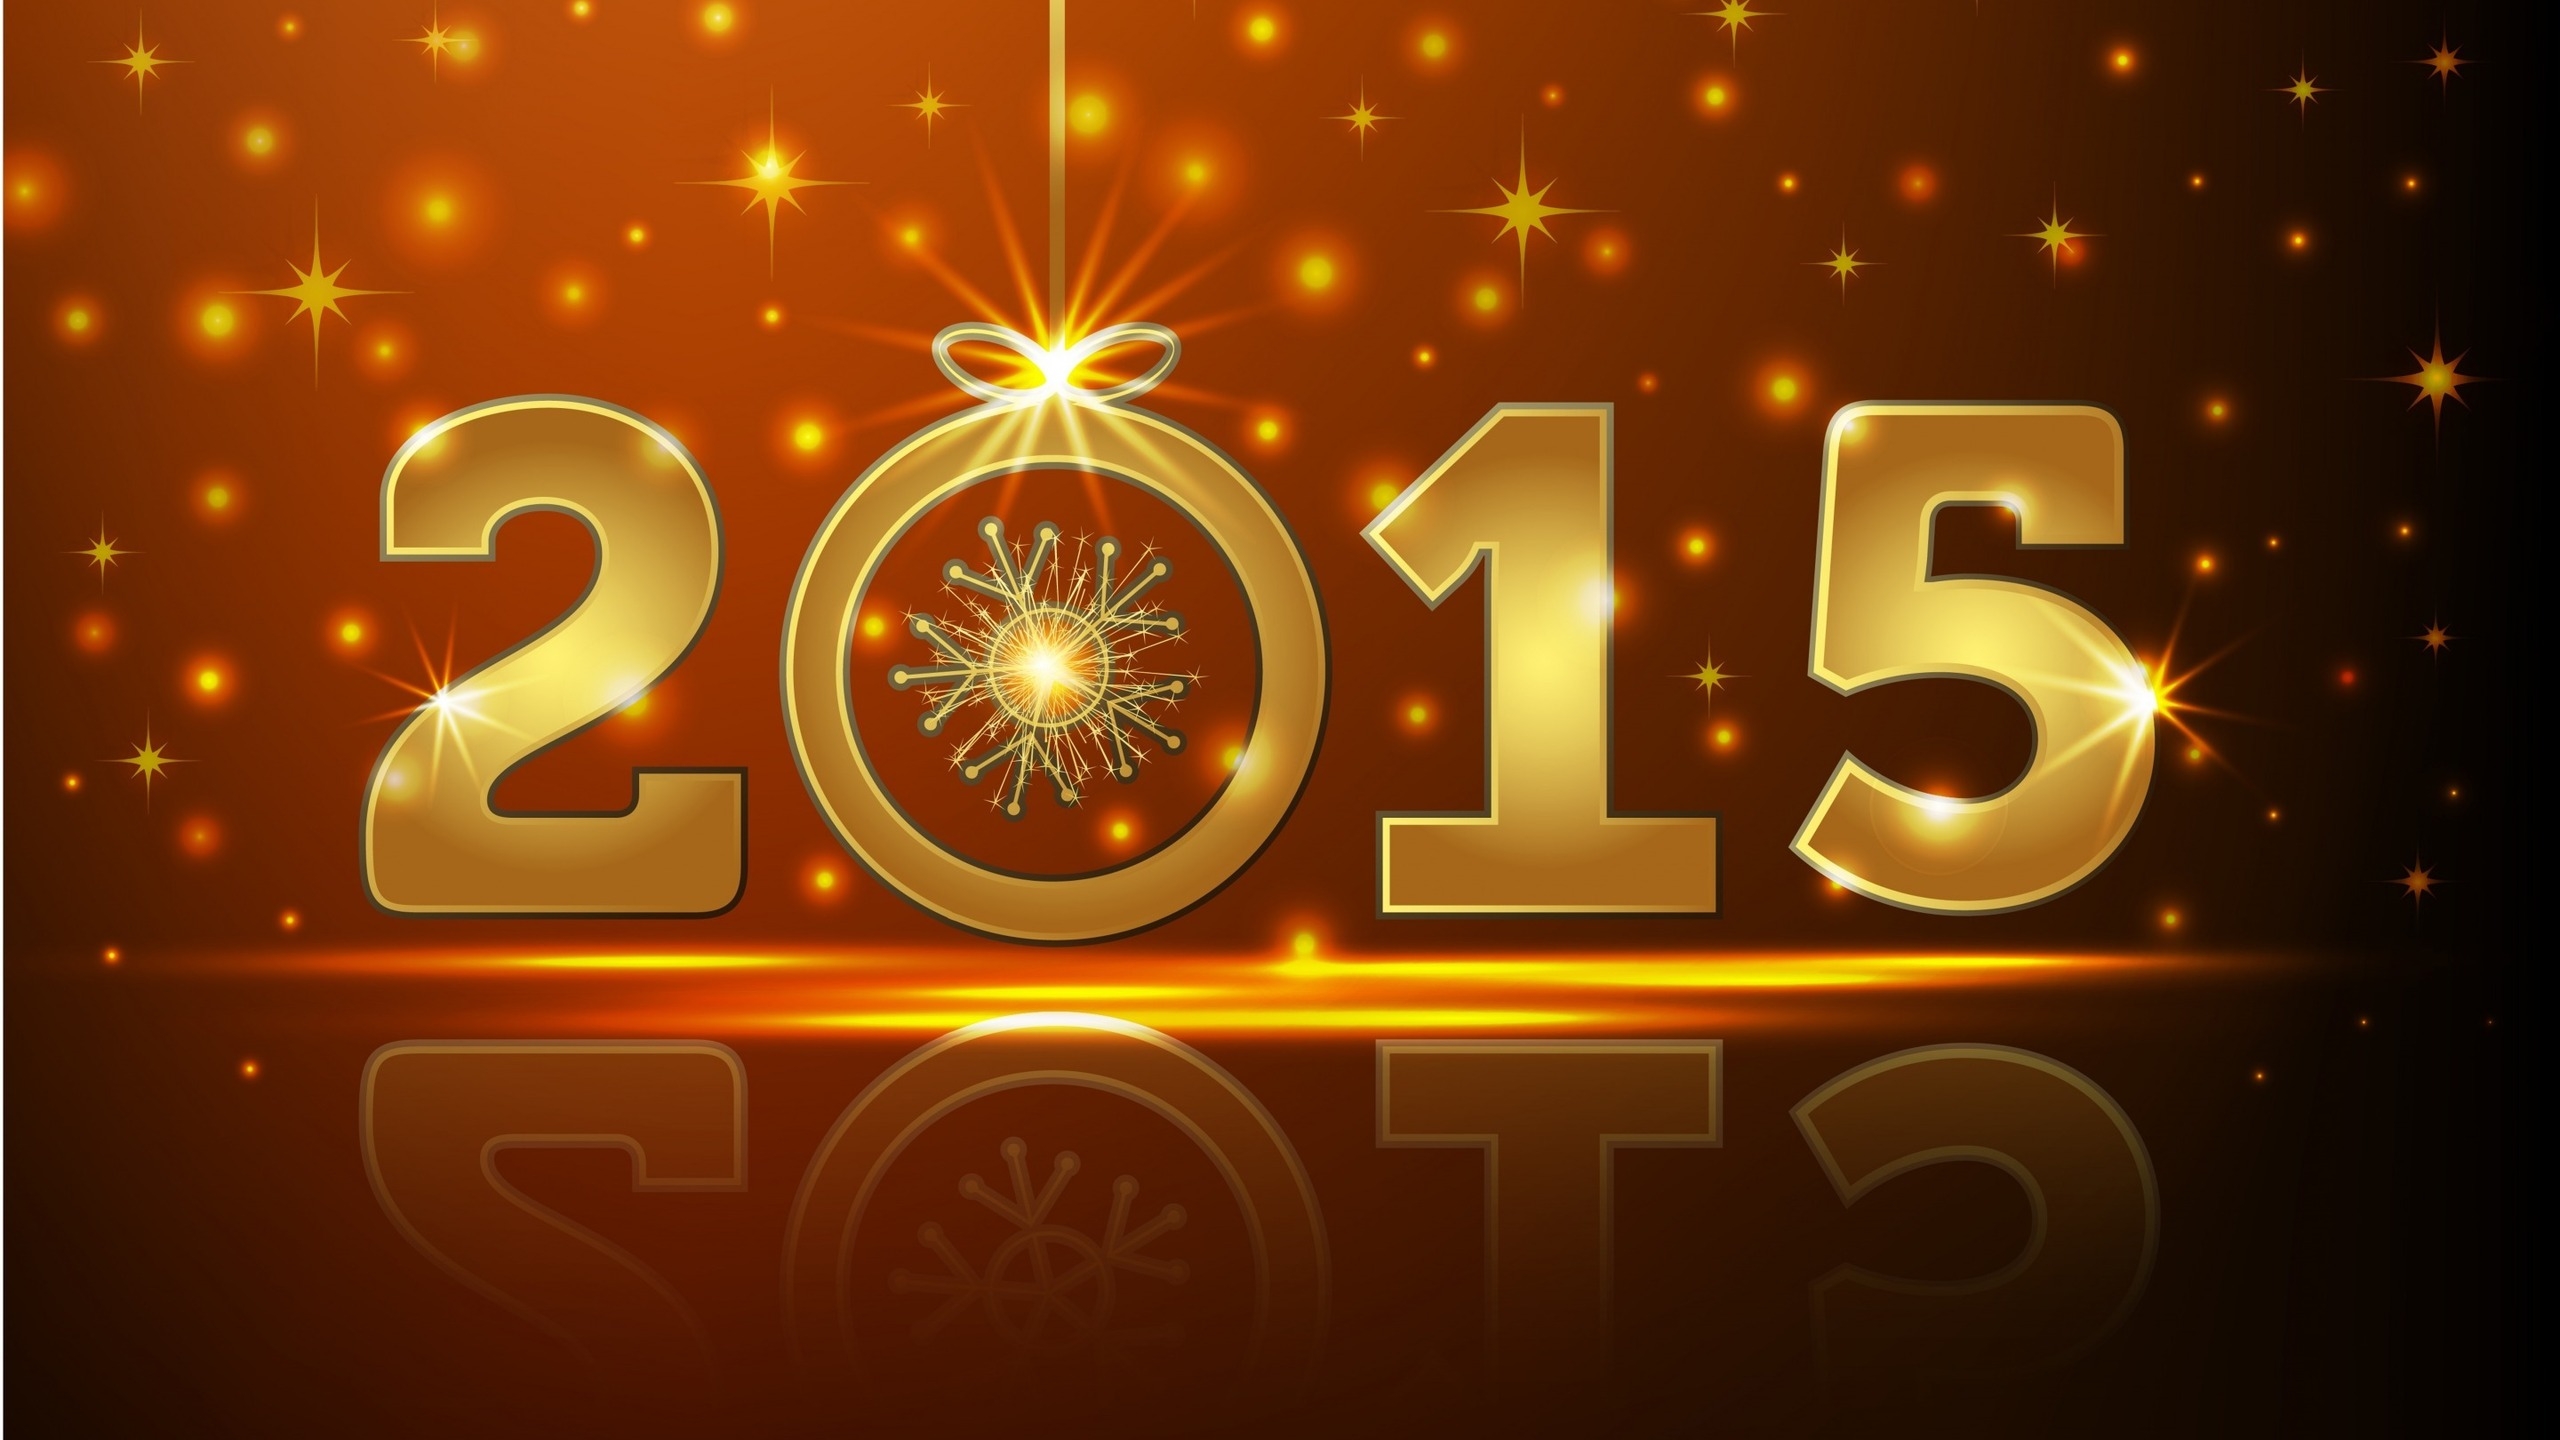 2015 New Year for 2560x1440 HDTV resolution